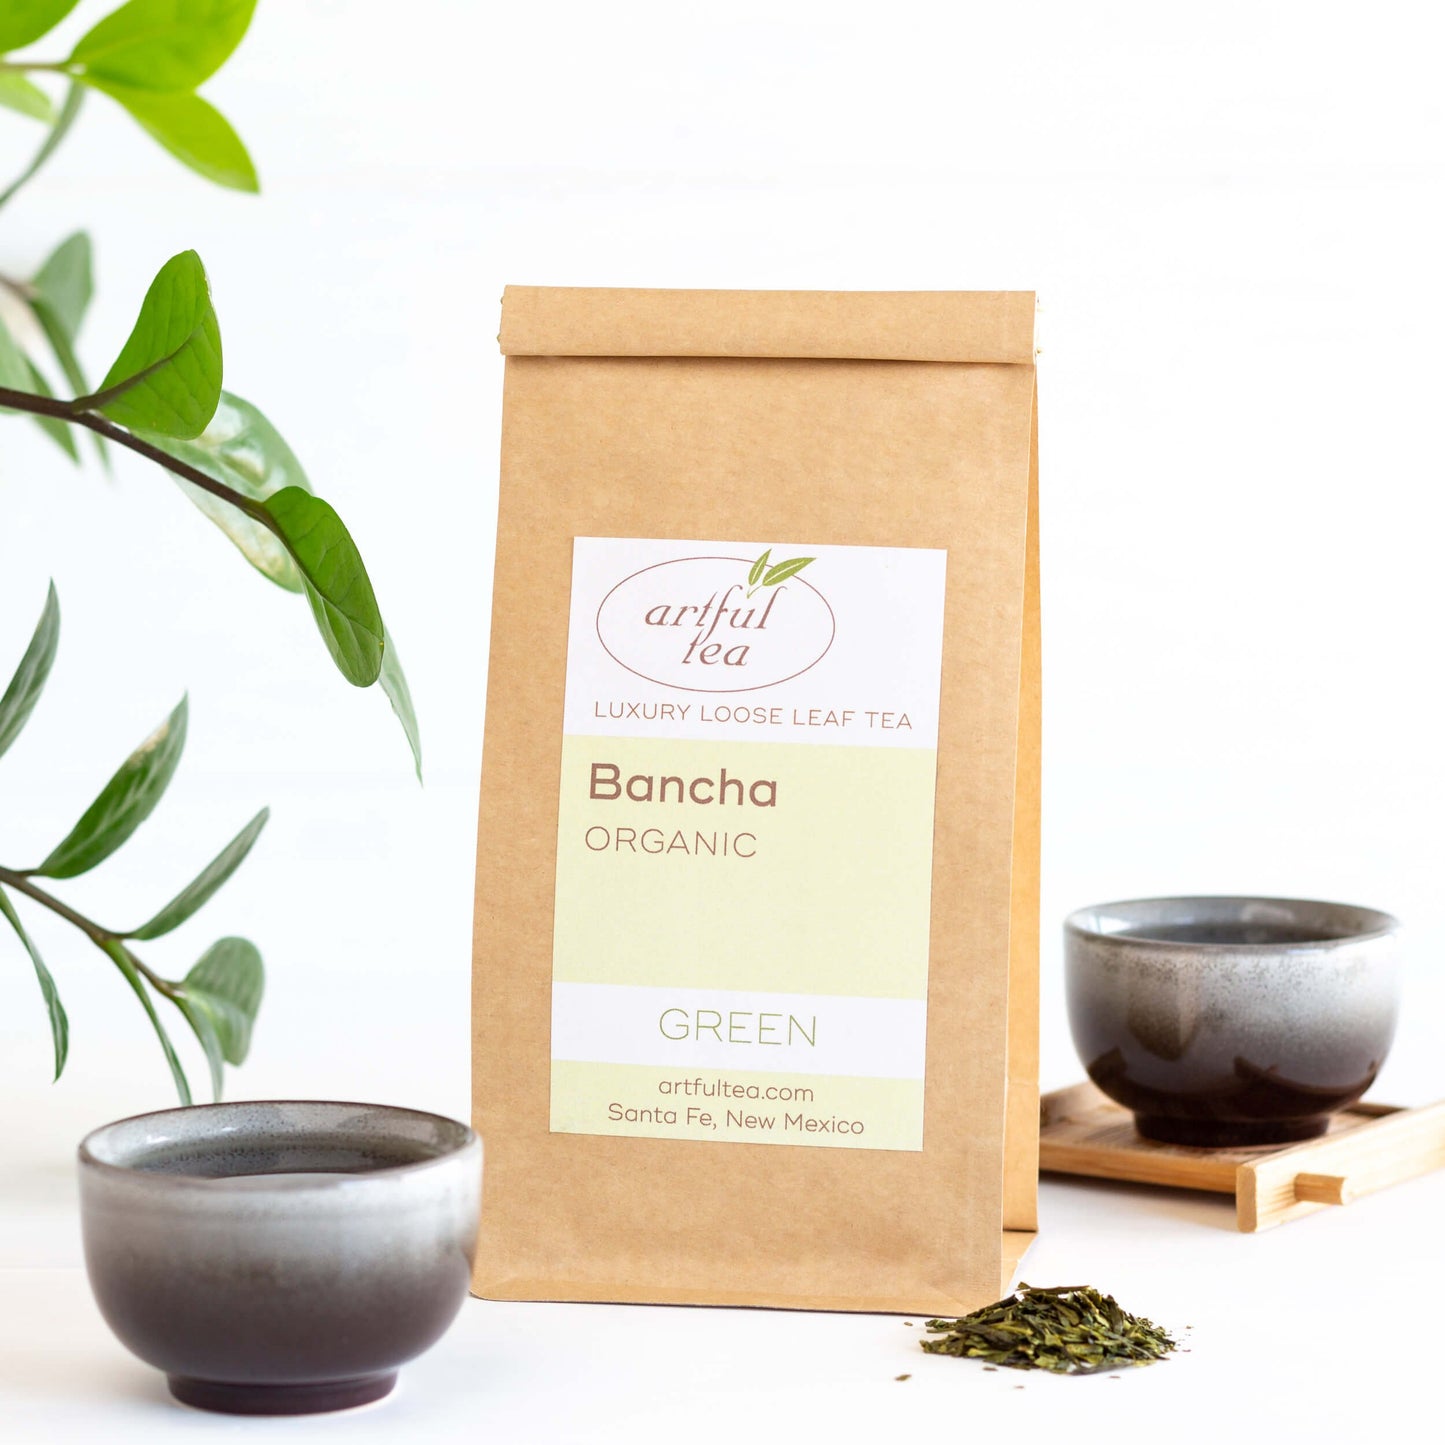 Banch Organic Green Tea shown packaged in a kraft bag, with two small black and gray teacups nearby. A green plant extends into the left side of the photo.